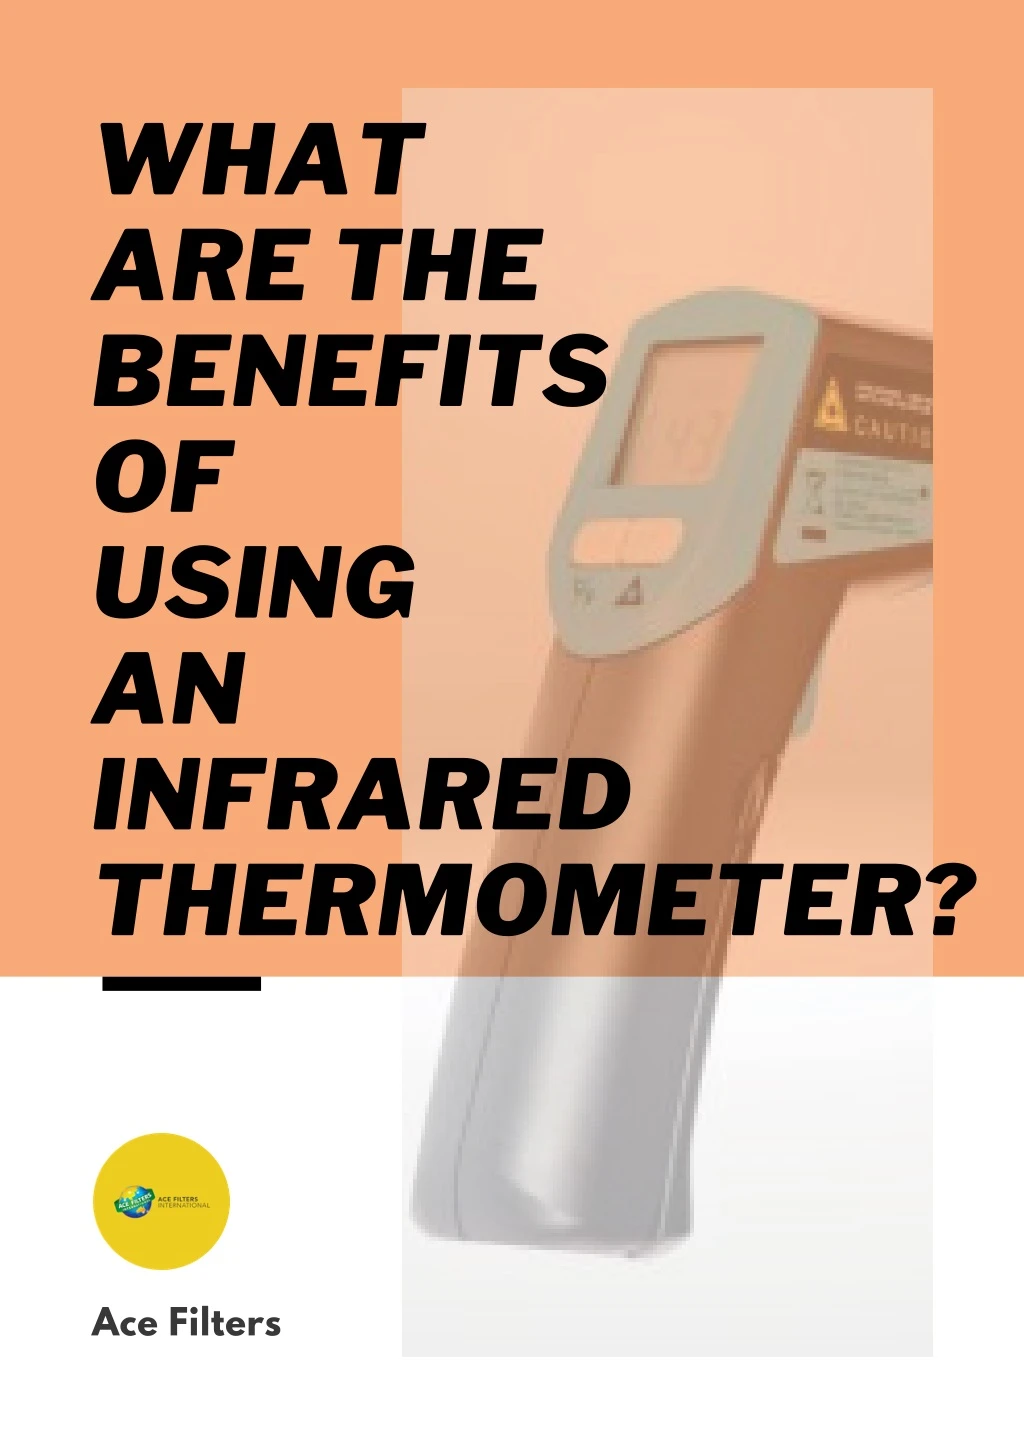 what are the benefits of using an infrared